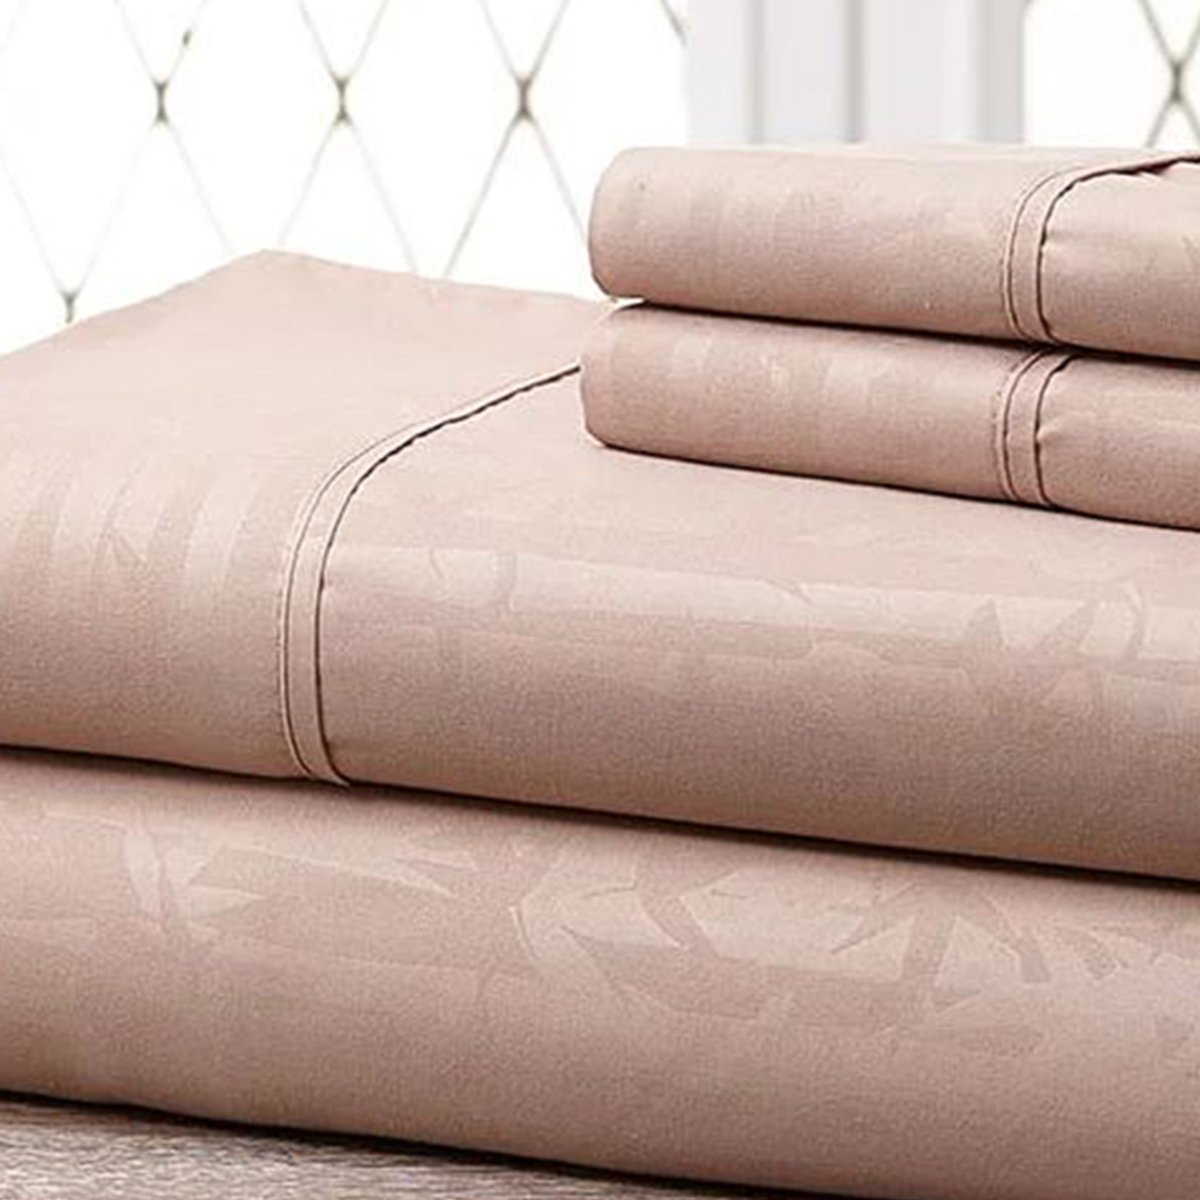 Hny-4pc-eb-tau-q Super-soft 1600 Series Bamboo Embossed Bed Sheet, Taupe - Queen, 4 Piece